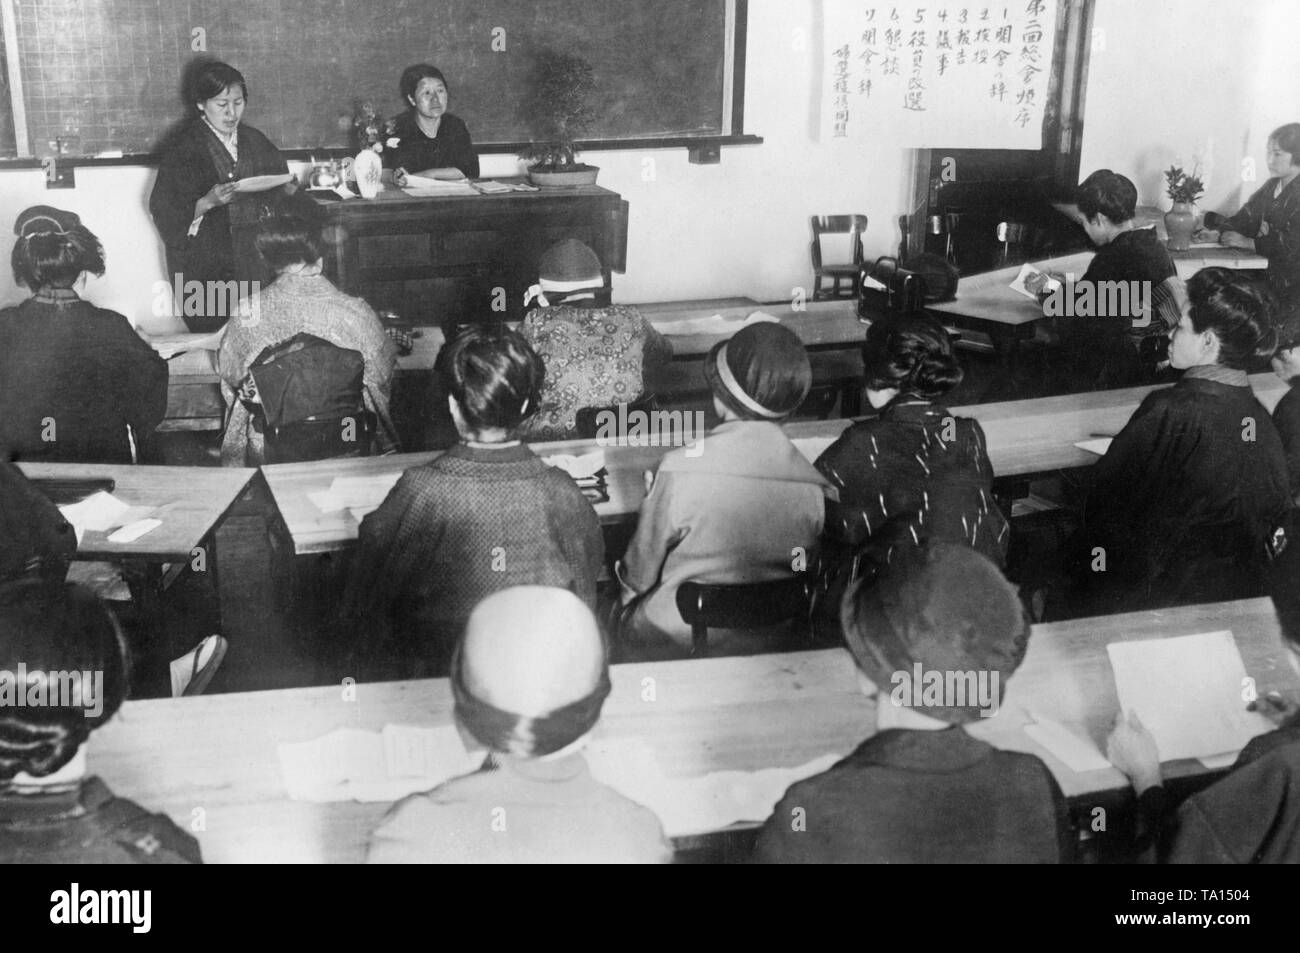 A group of women's rights activists, advocating among others for women's suffrage in Japan, at a classroom meeting. Stock Photo